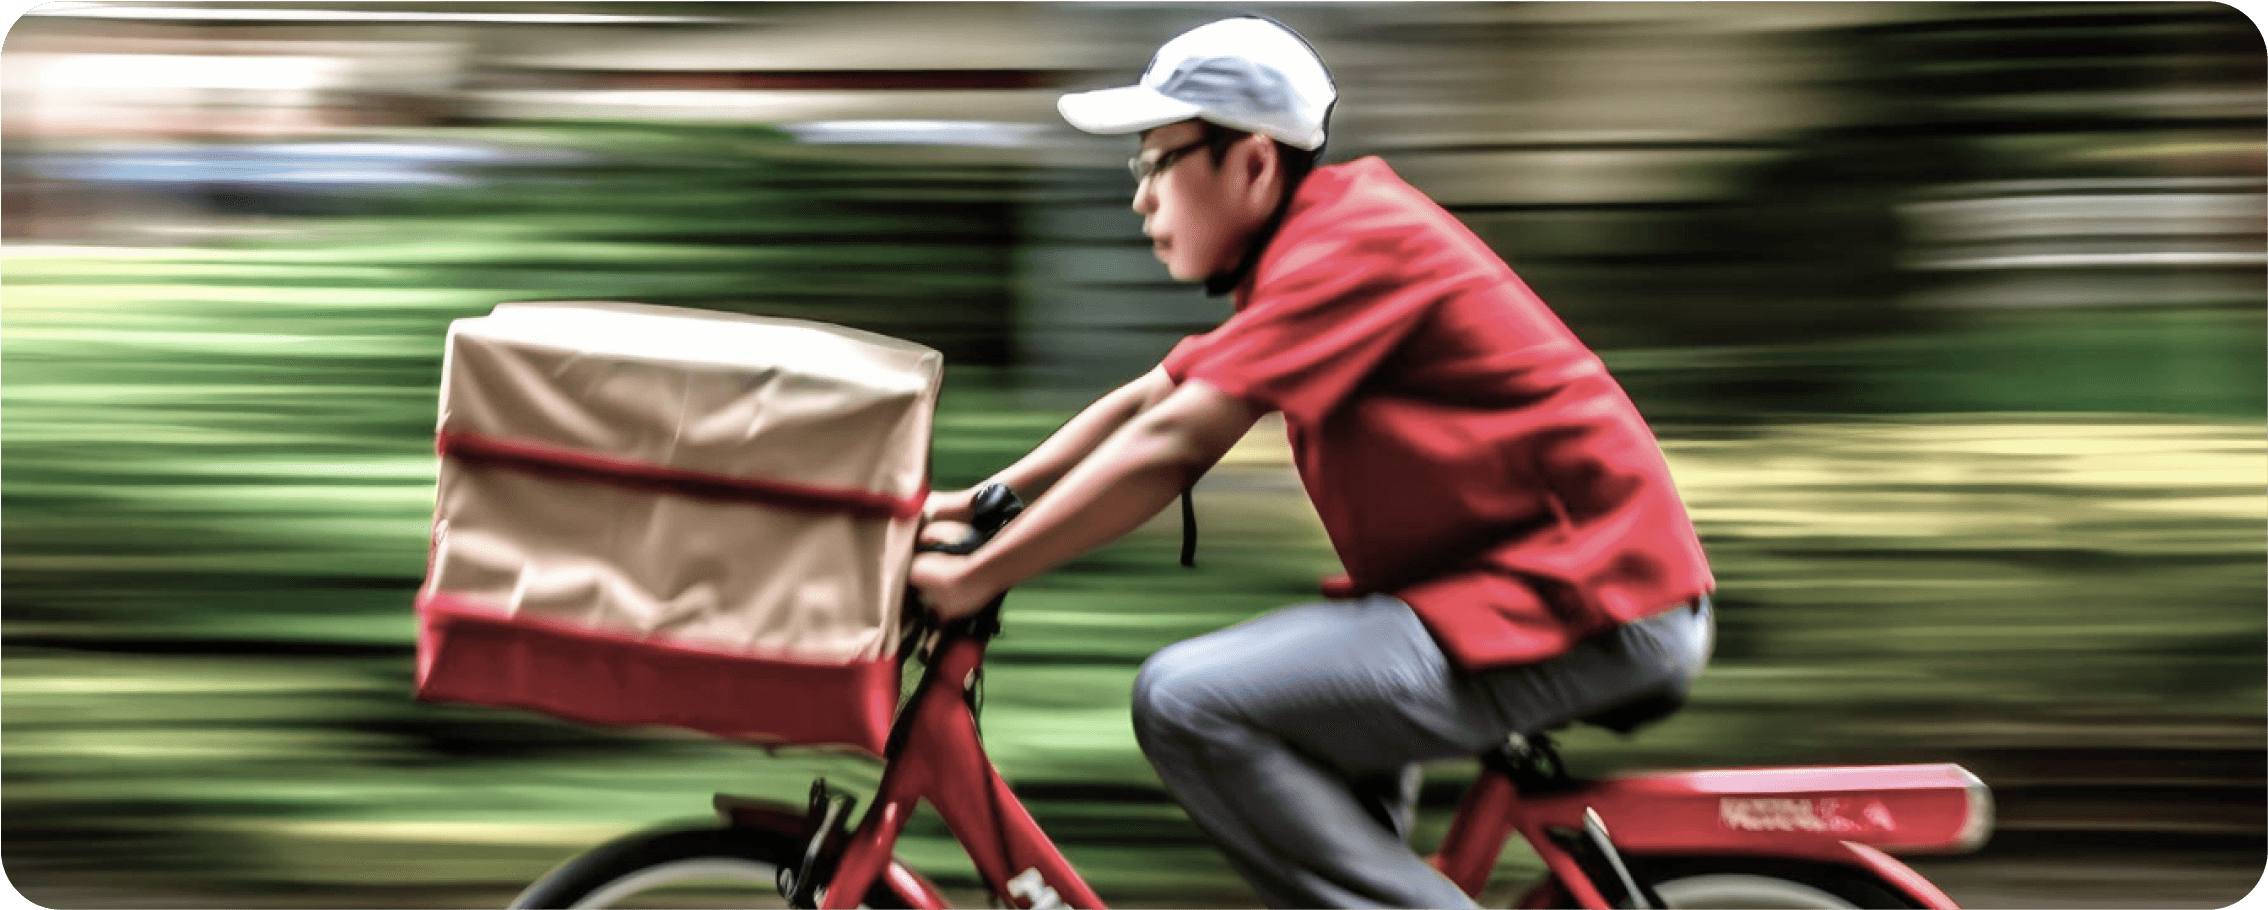 A delivery guy is rushing to deliver an order with his bicycle.